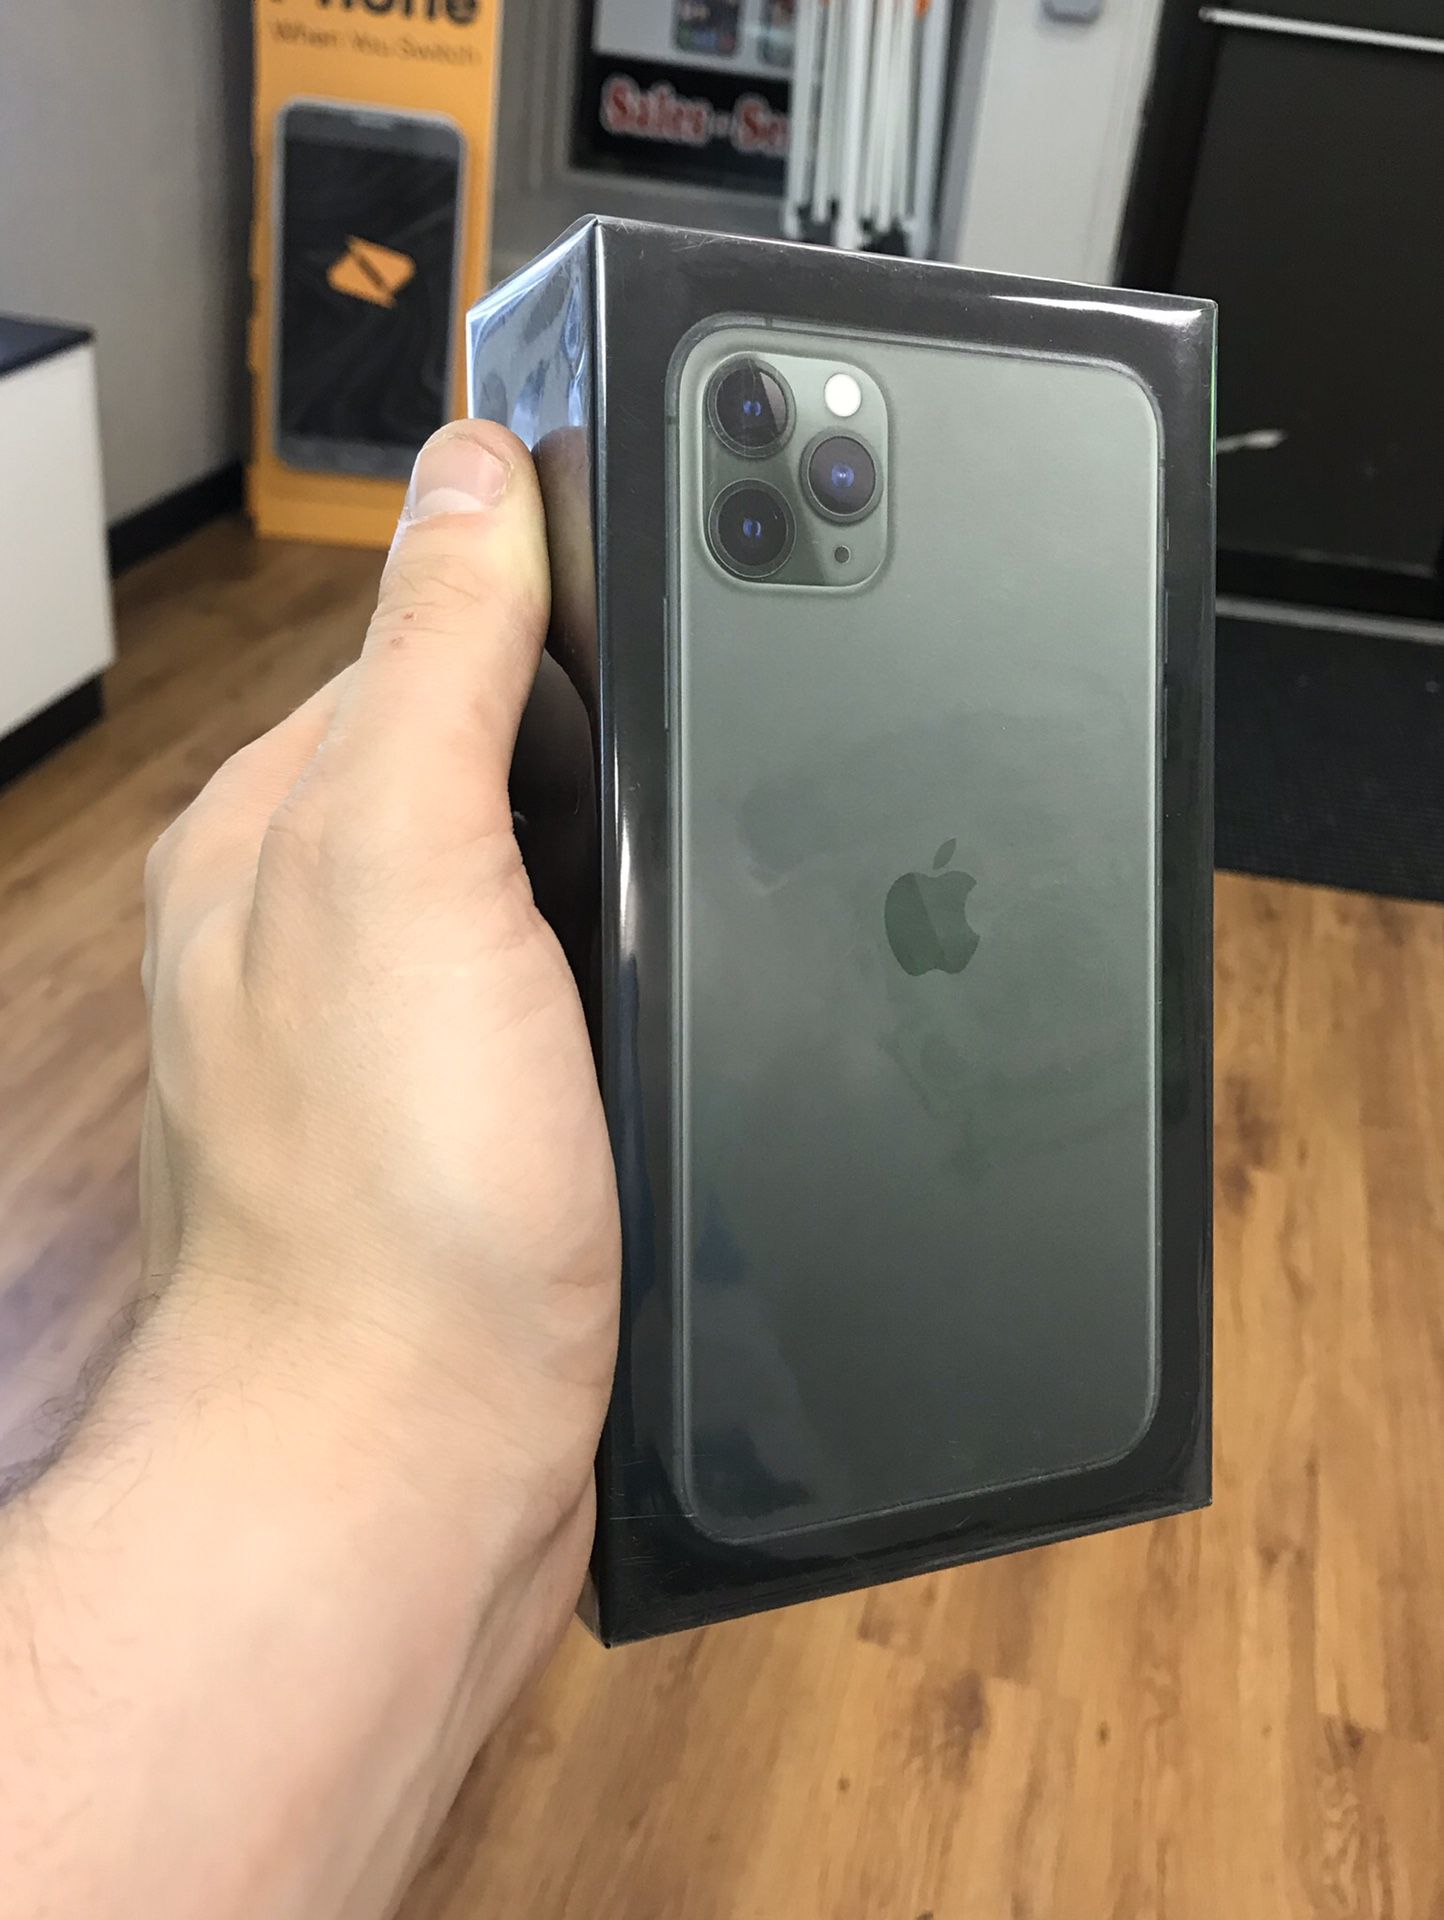 Finance New Unlocked iPhone 11 Pro Max - Only $50 down today!